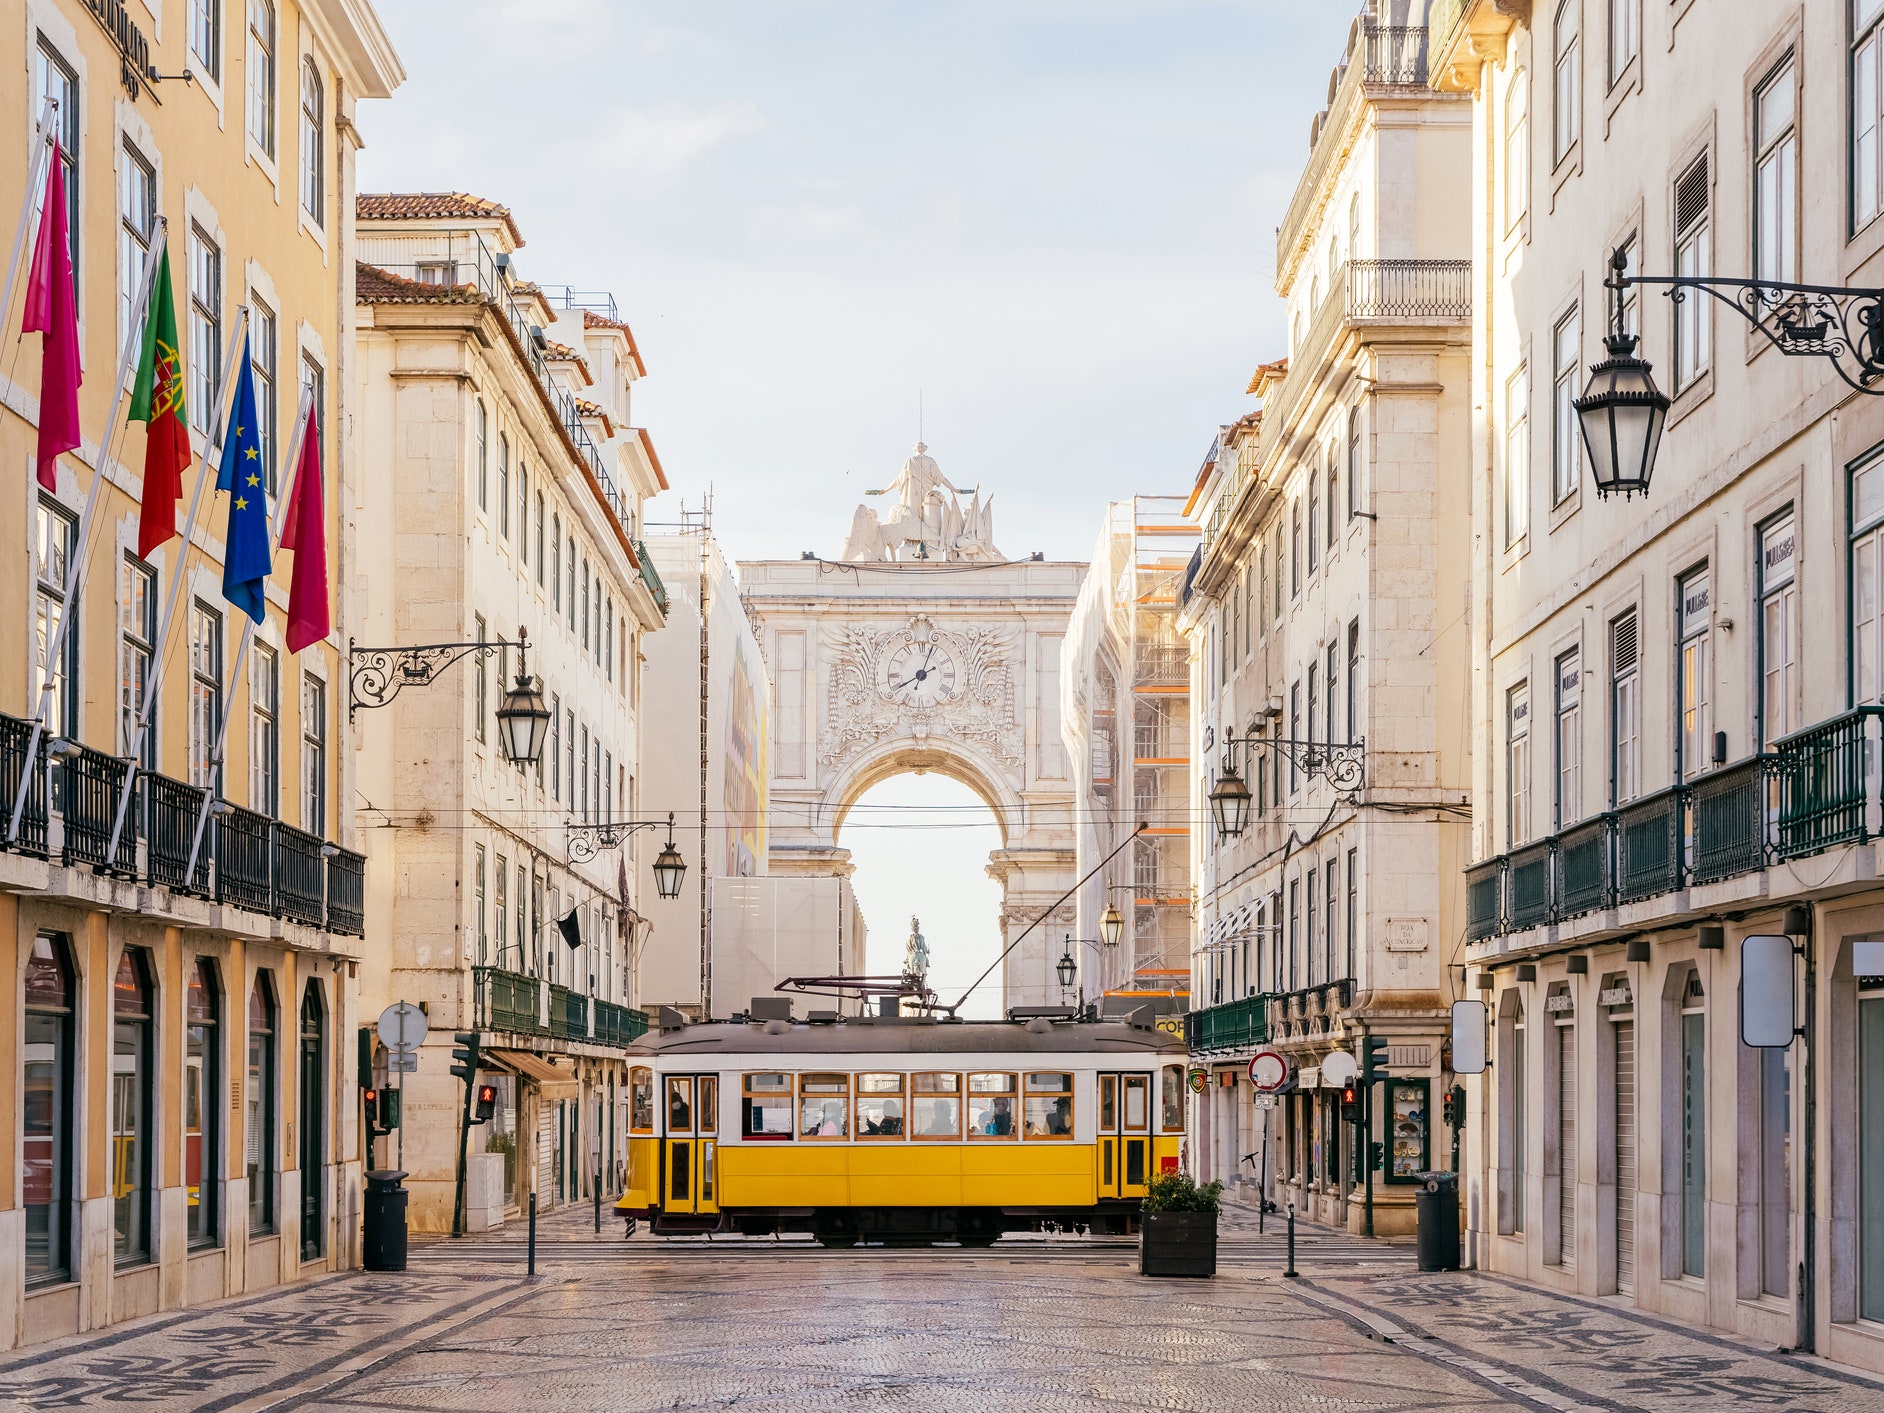 When is the best time to visit Lisbon?